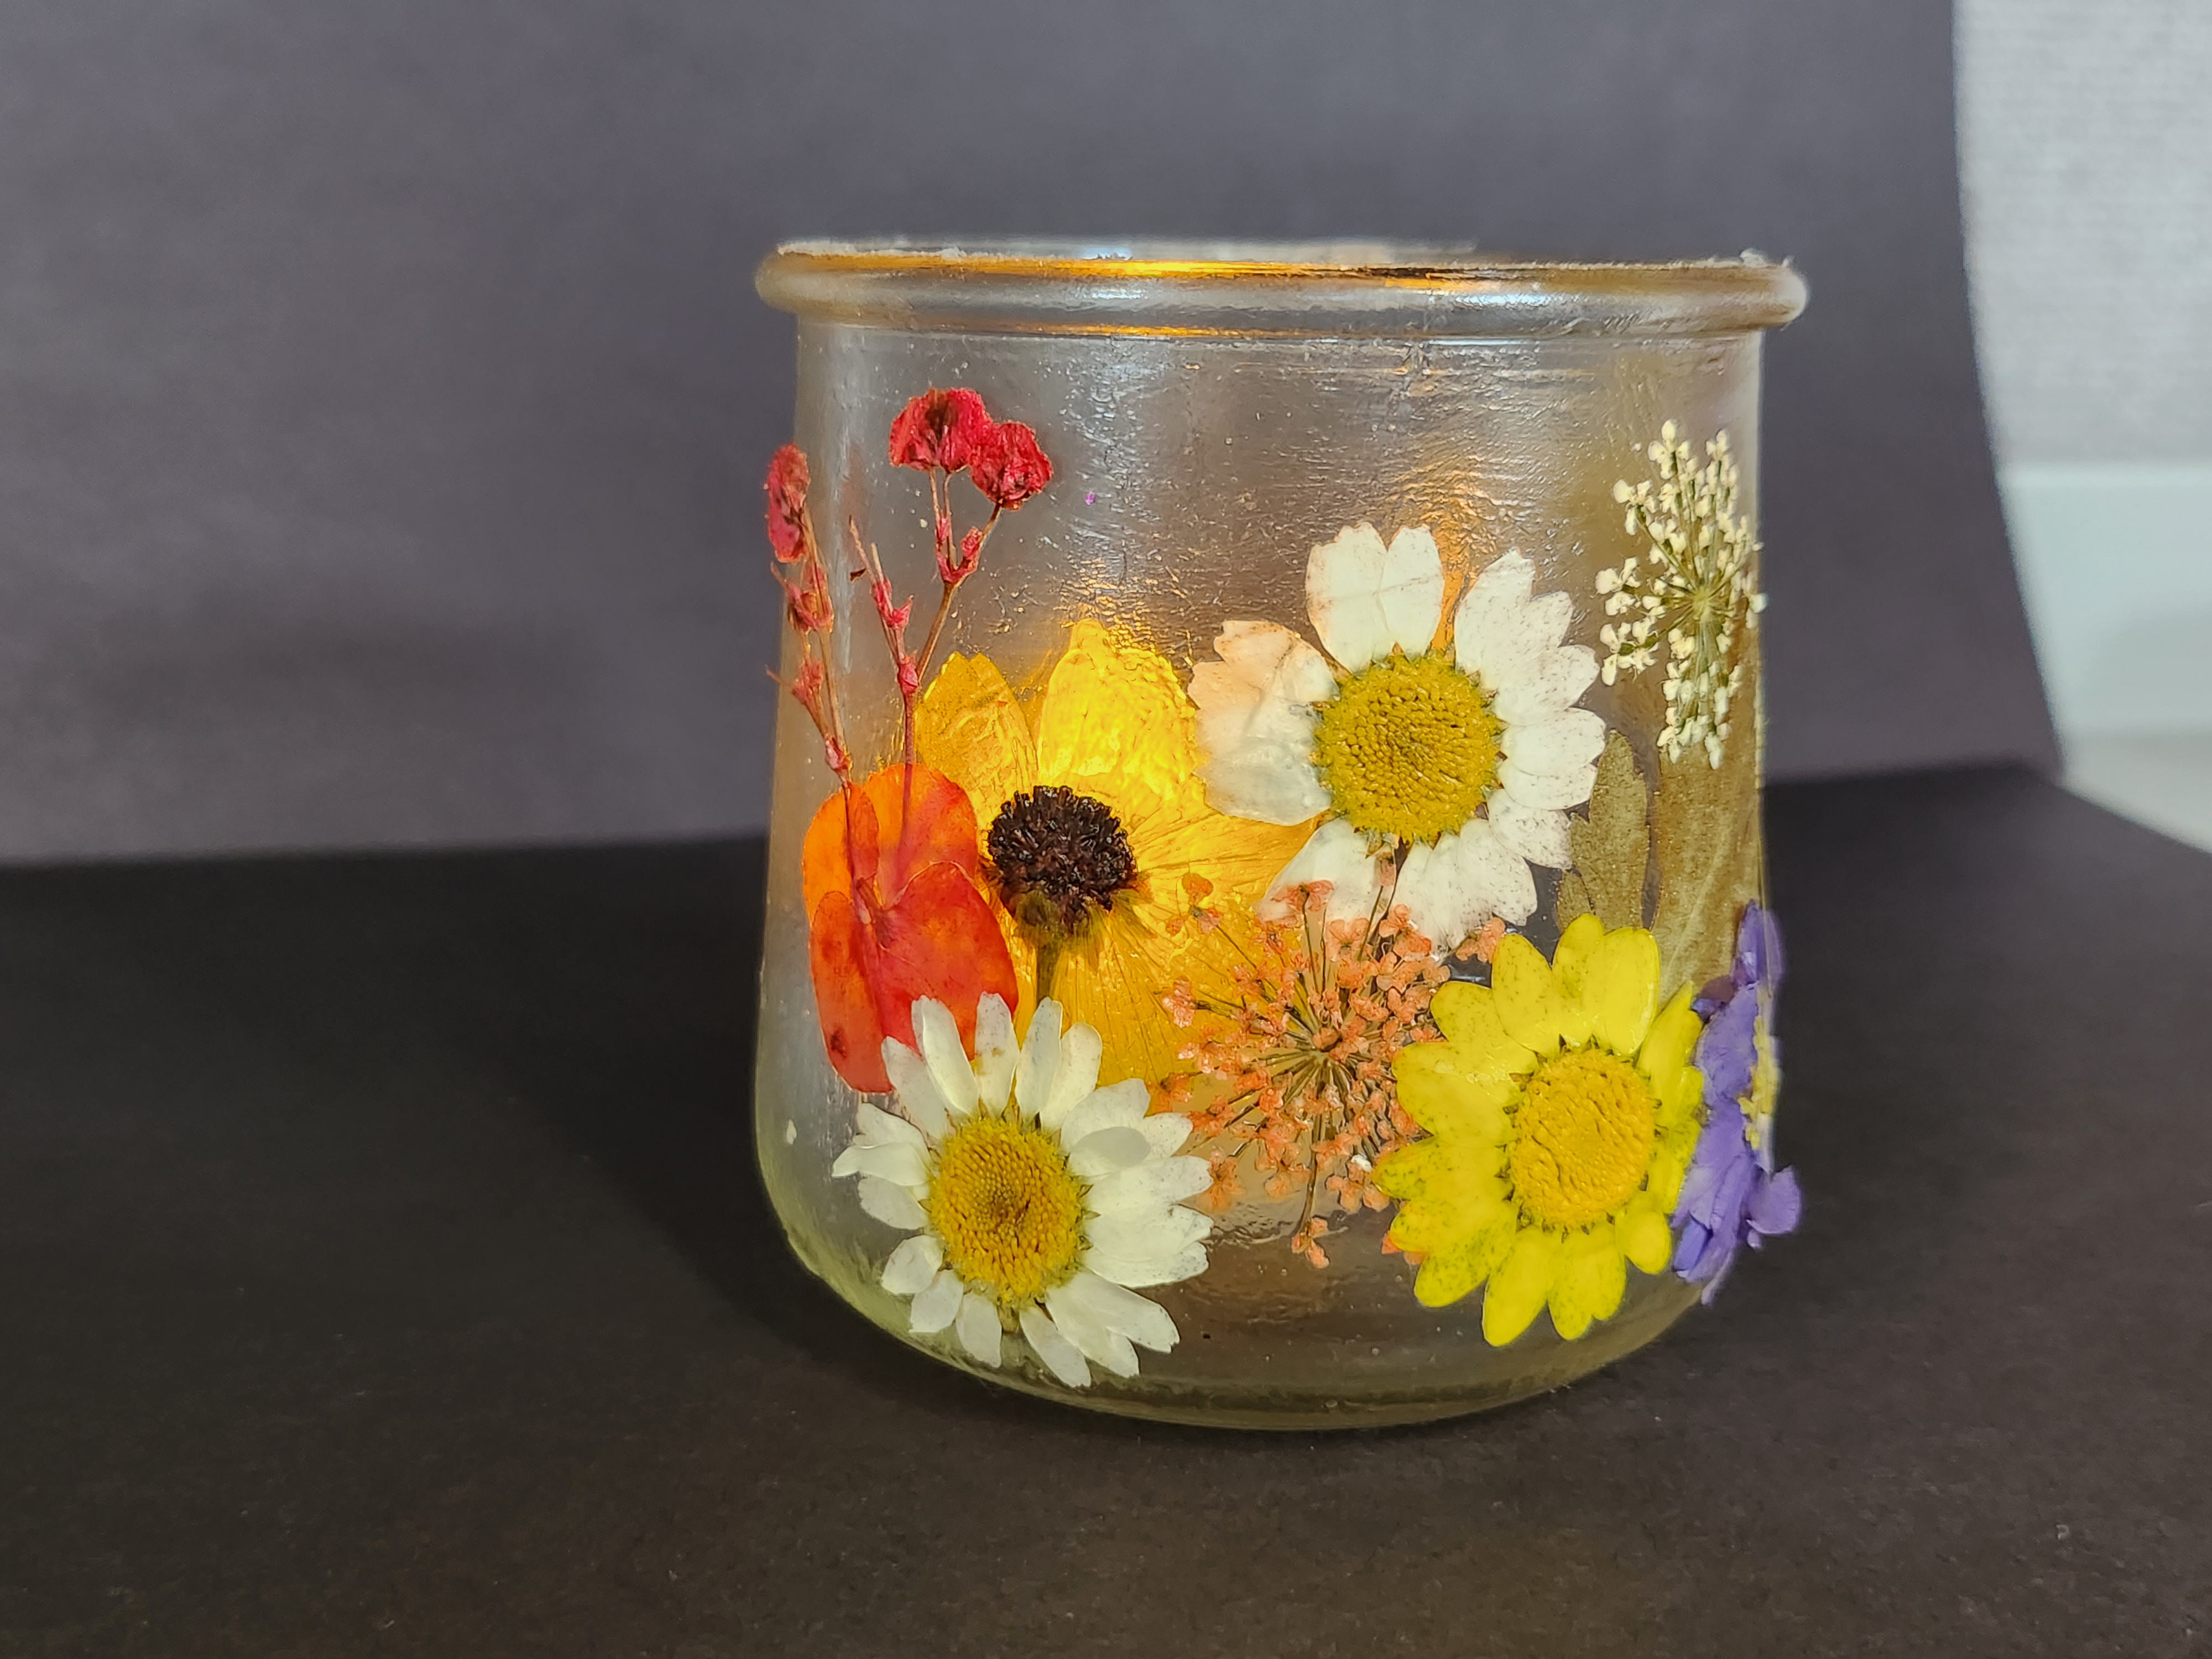 Glass jar with pressed flowers on the sides of the jar